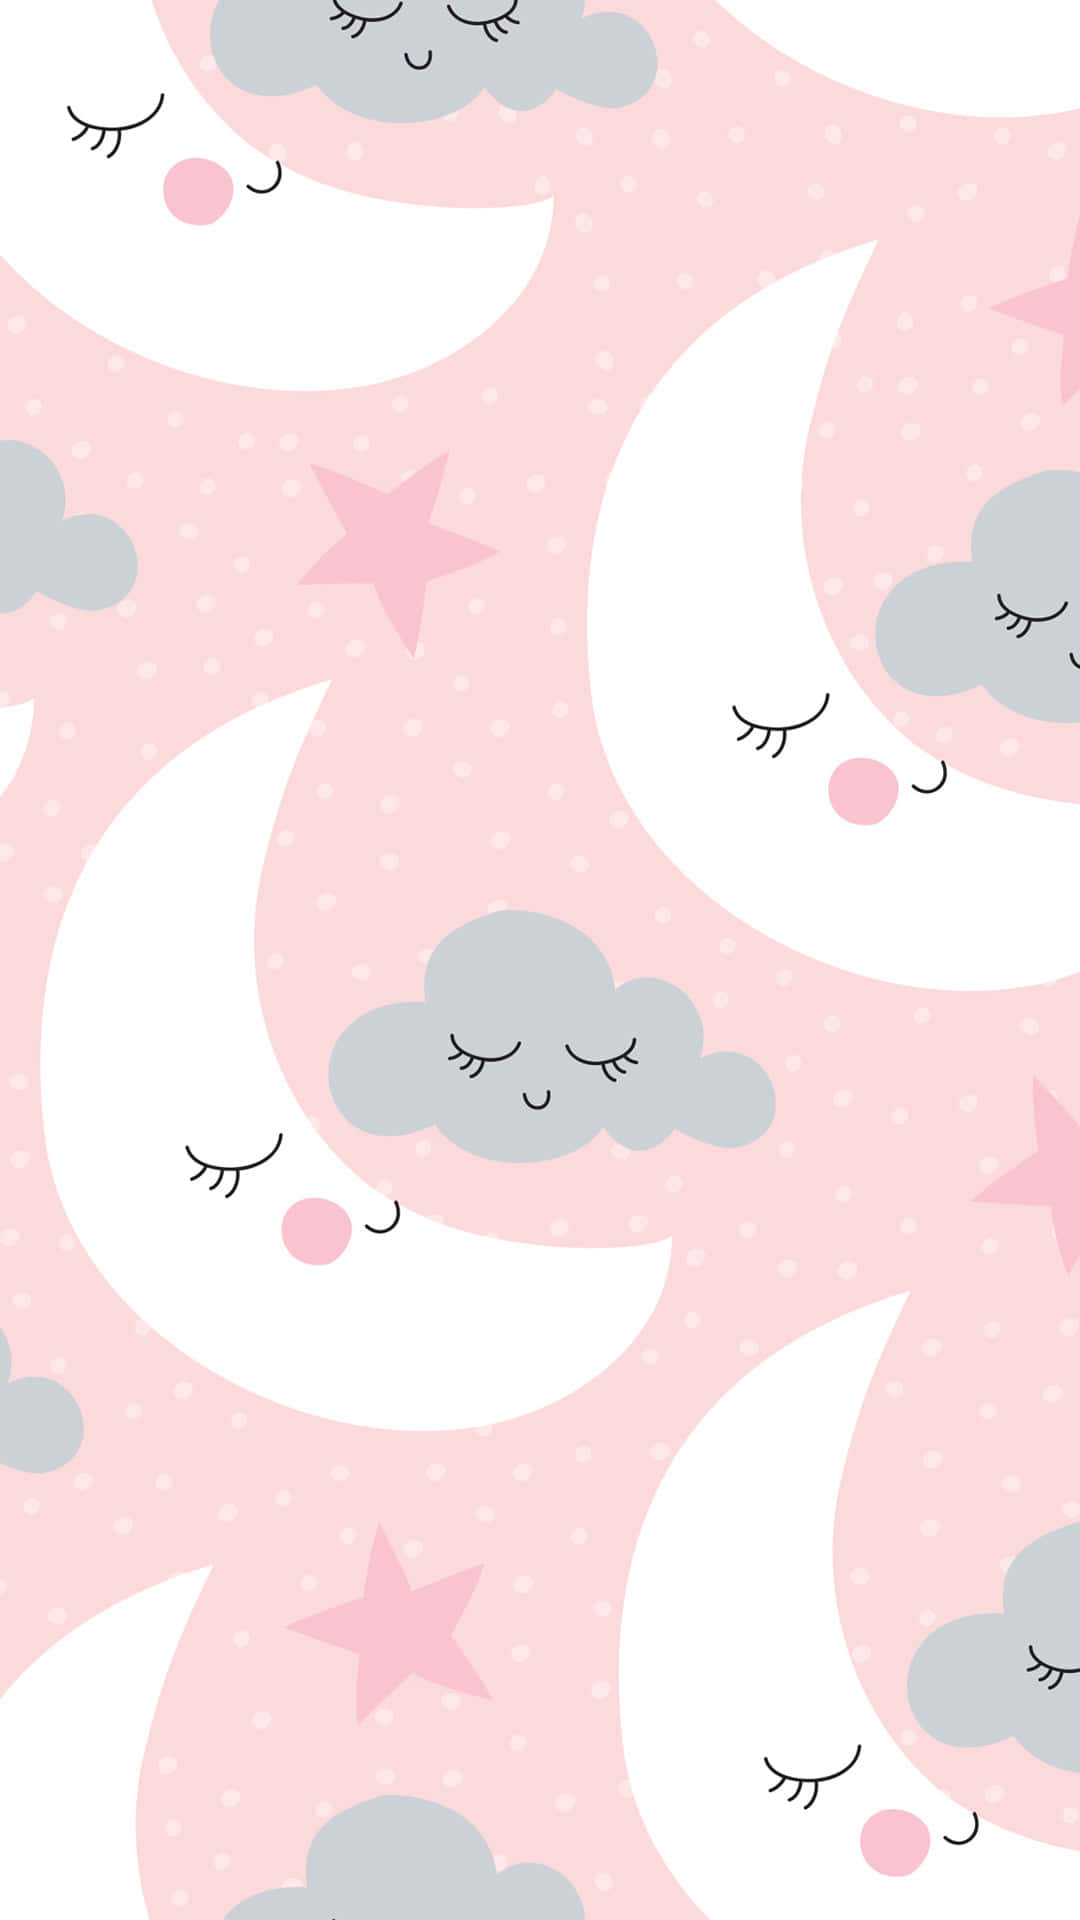 Girly Cute Moon And Cloud Picture